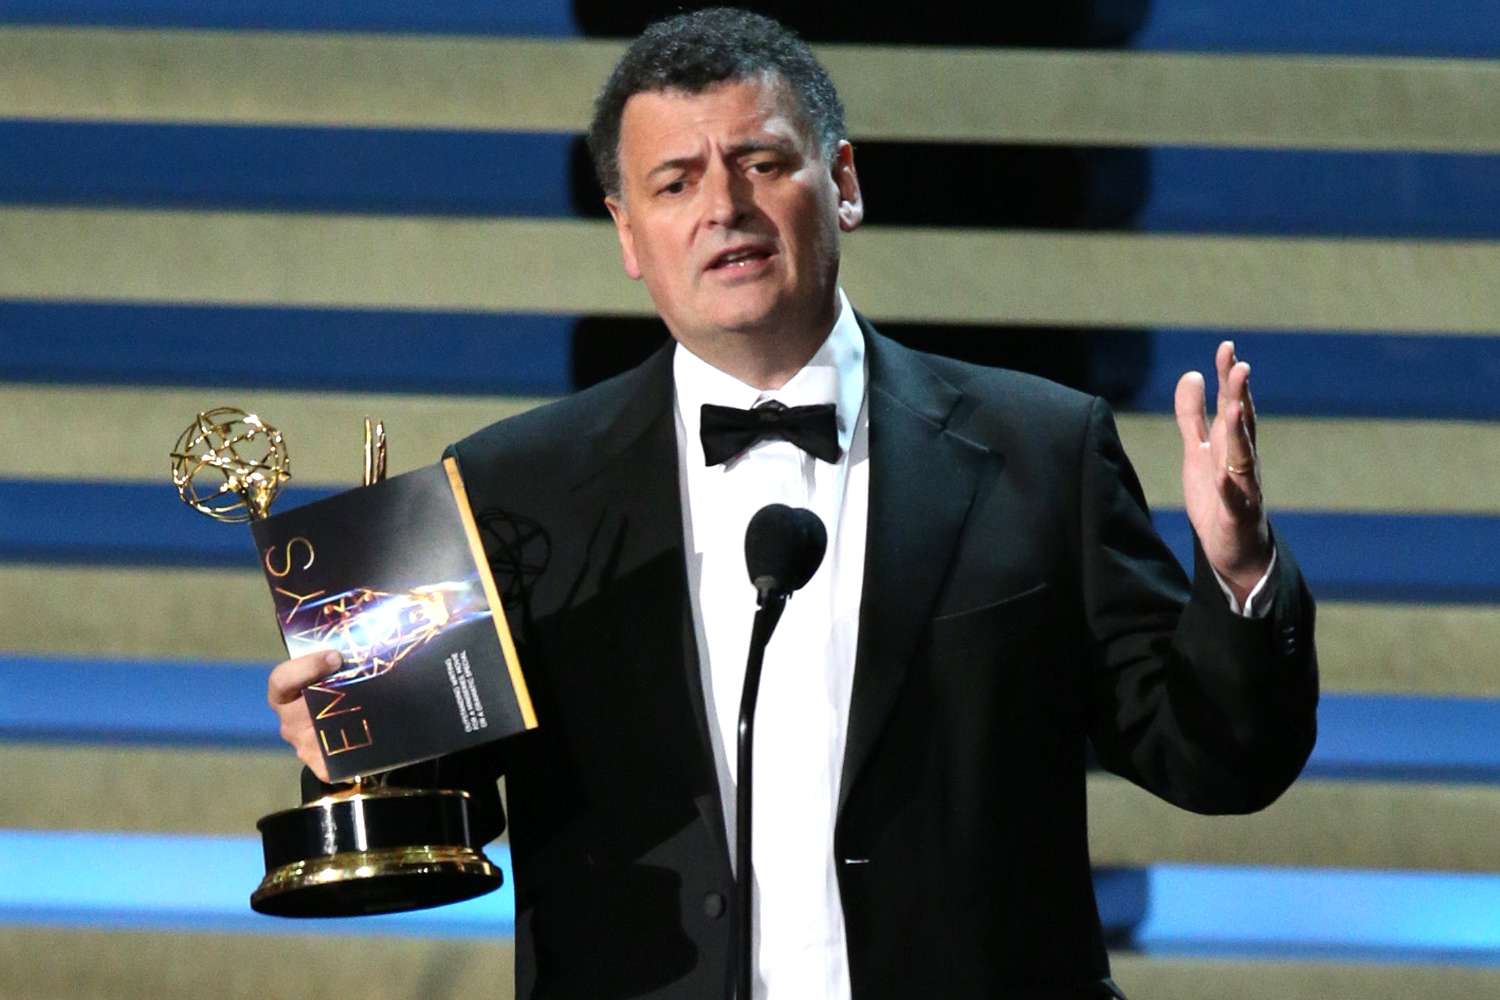 Steven Moffat accepts the Outstanding Writing for a Miniseries, Movie or a Dramatic Special award for 'Sherlock: His Last Vow'